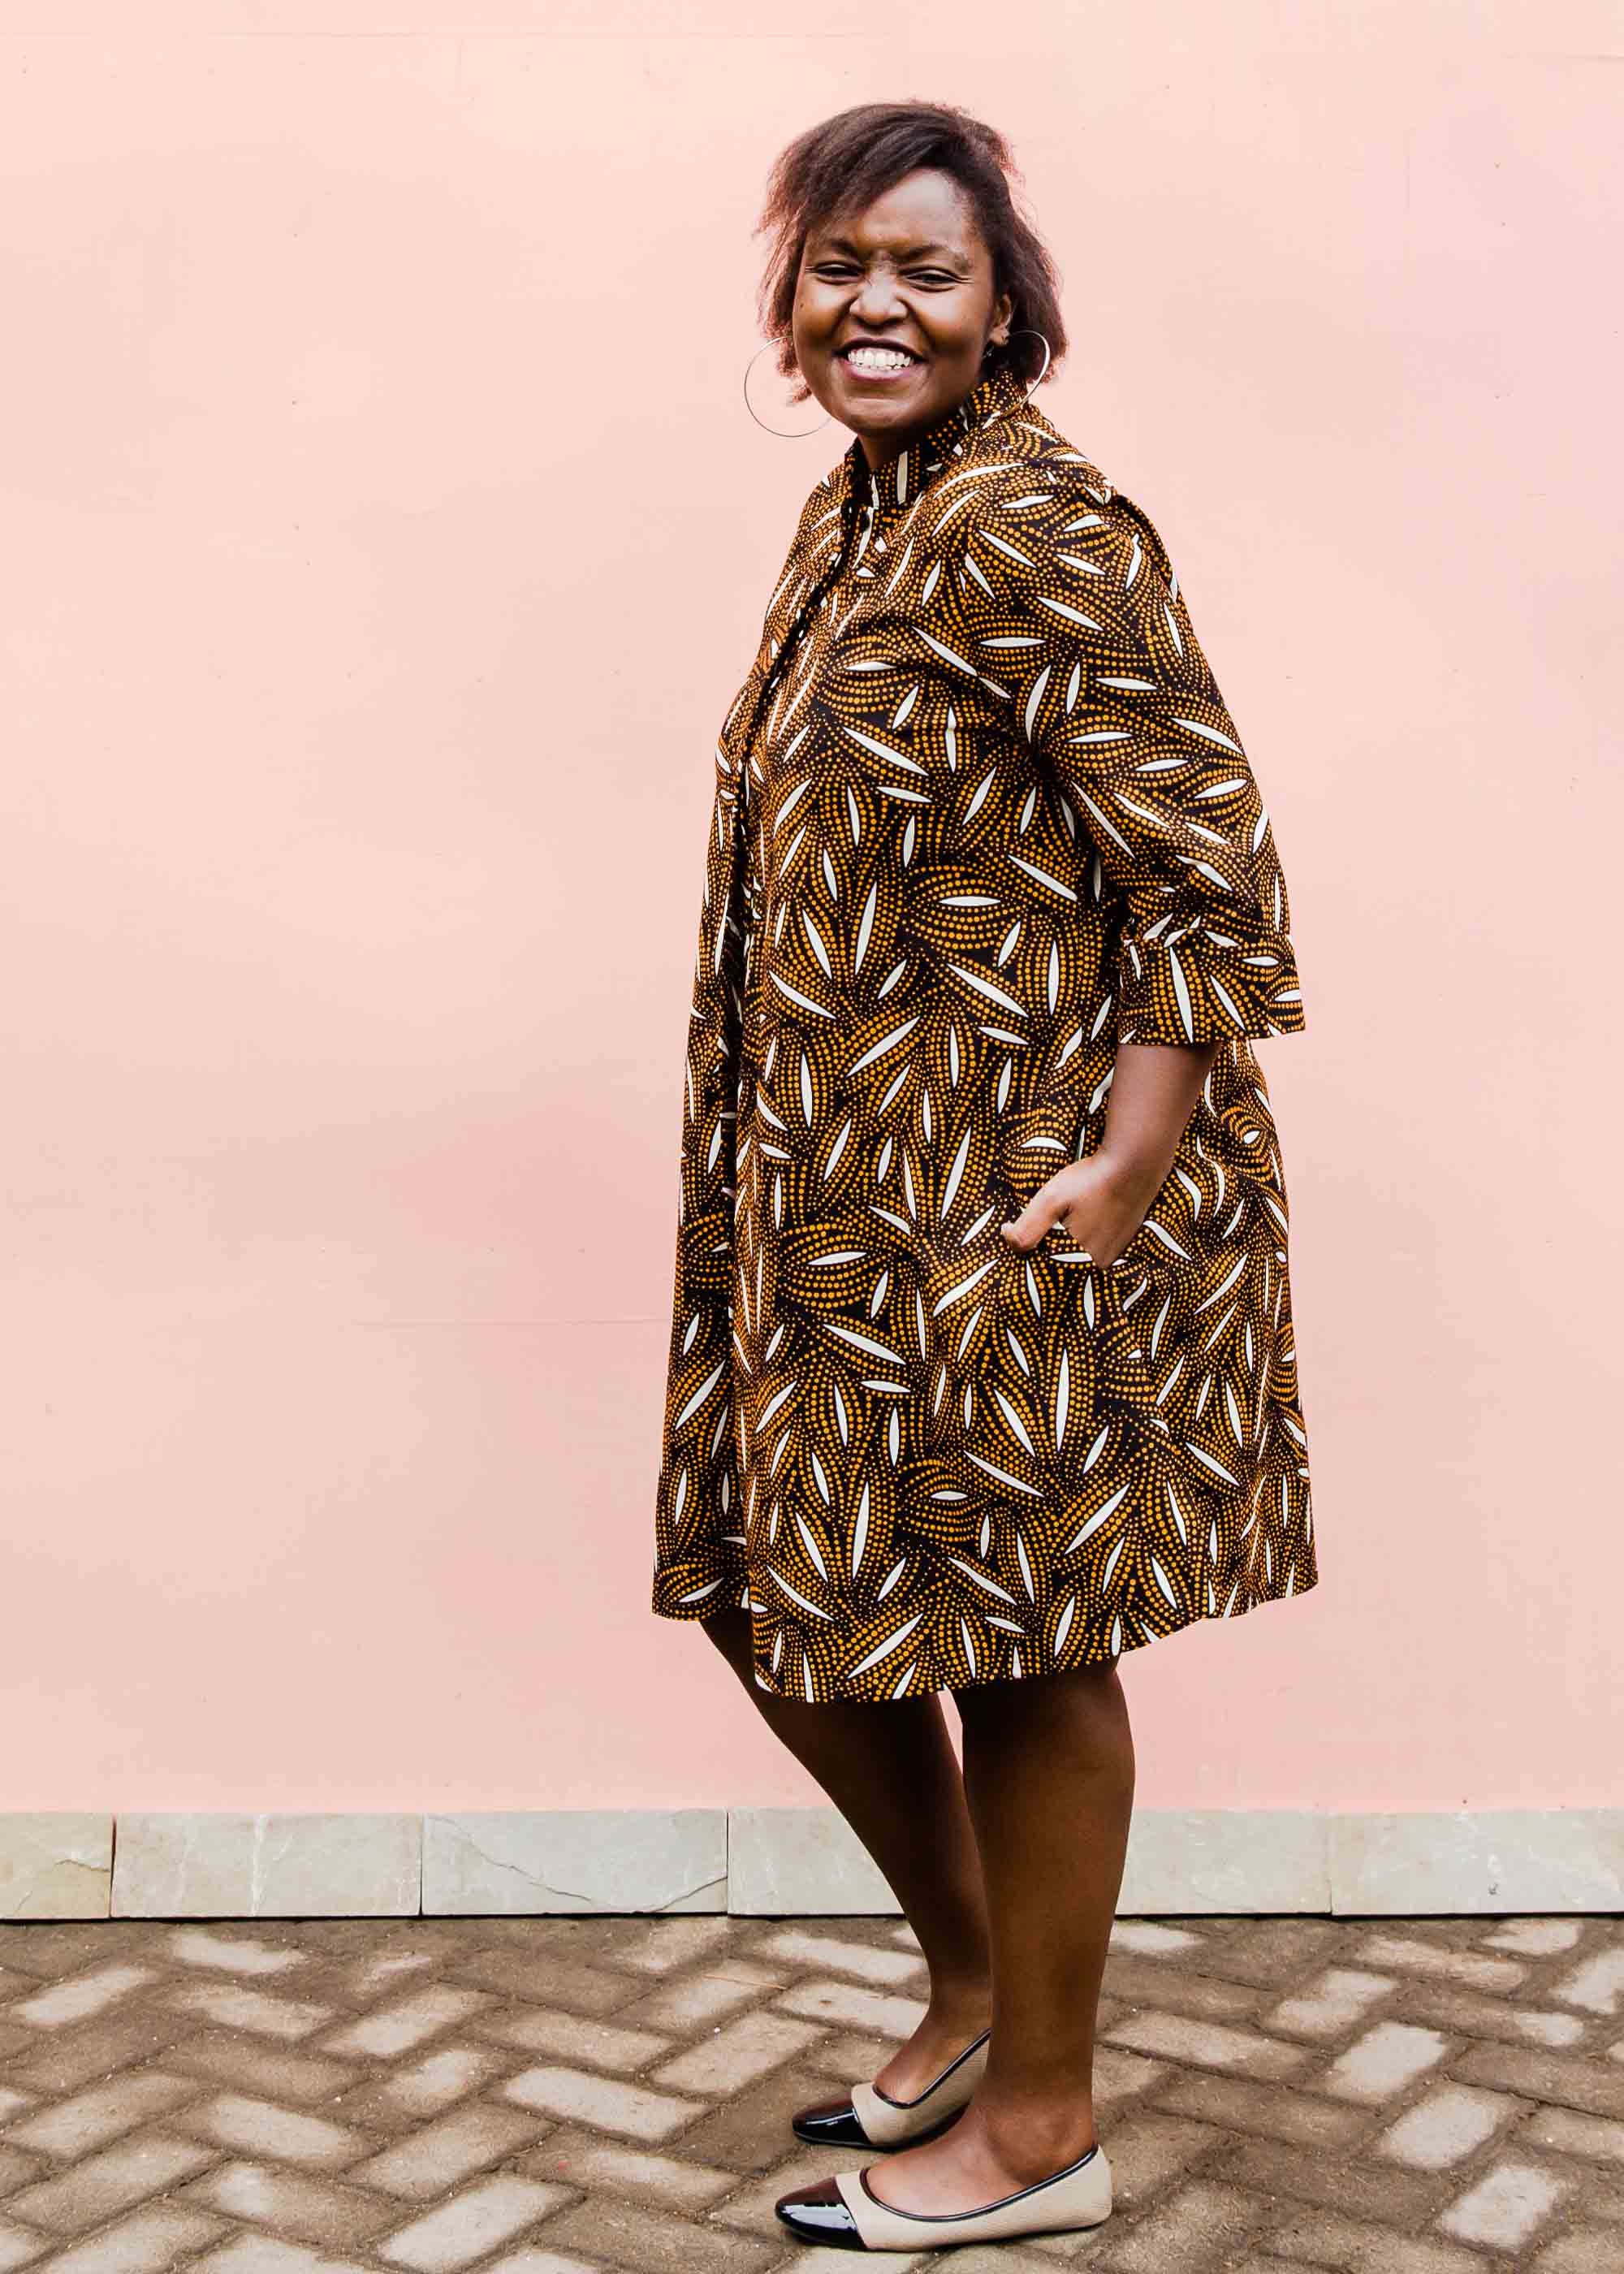 model wearing a brown, black and white seed design dress